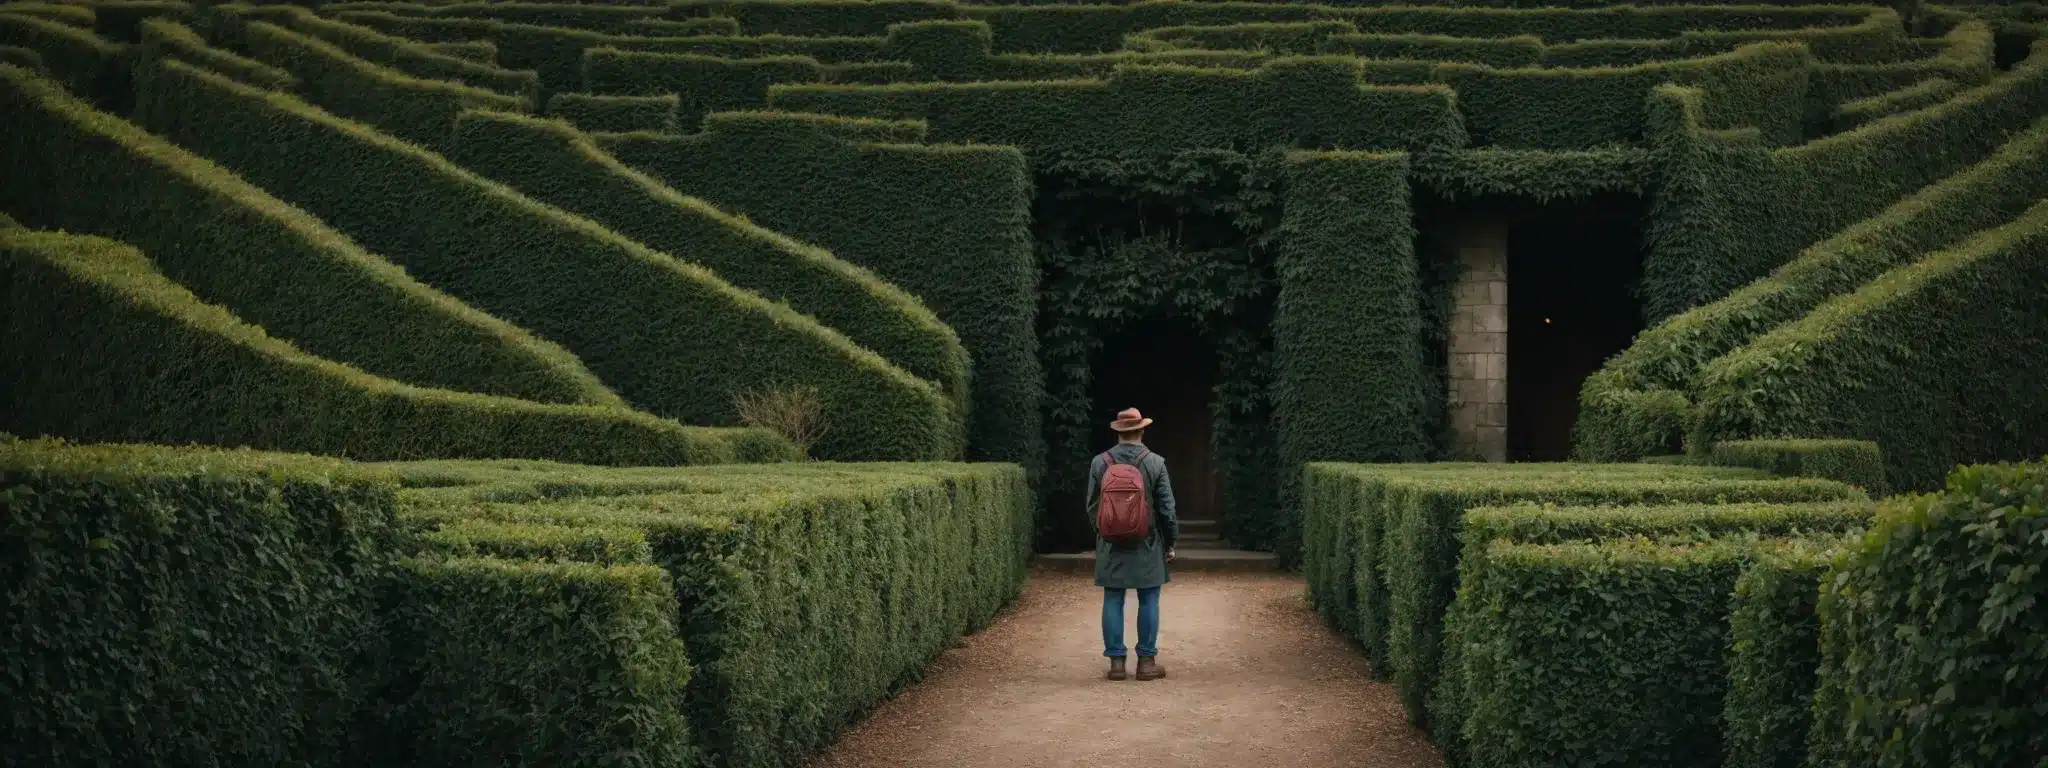 A Treasure Hunter Stands At The Entrance Of A Vast, Mystical Hedge Maze With A Compass In Hand, Ready To Explore.